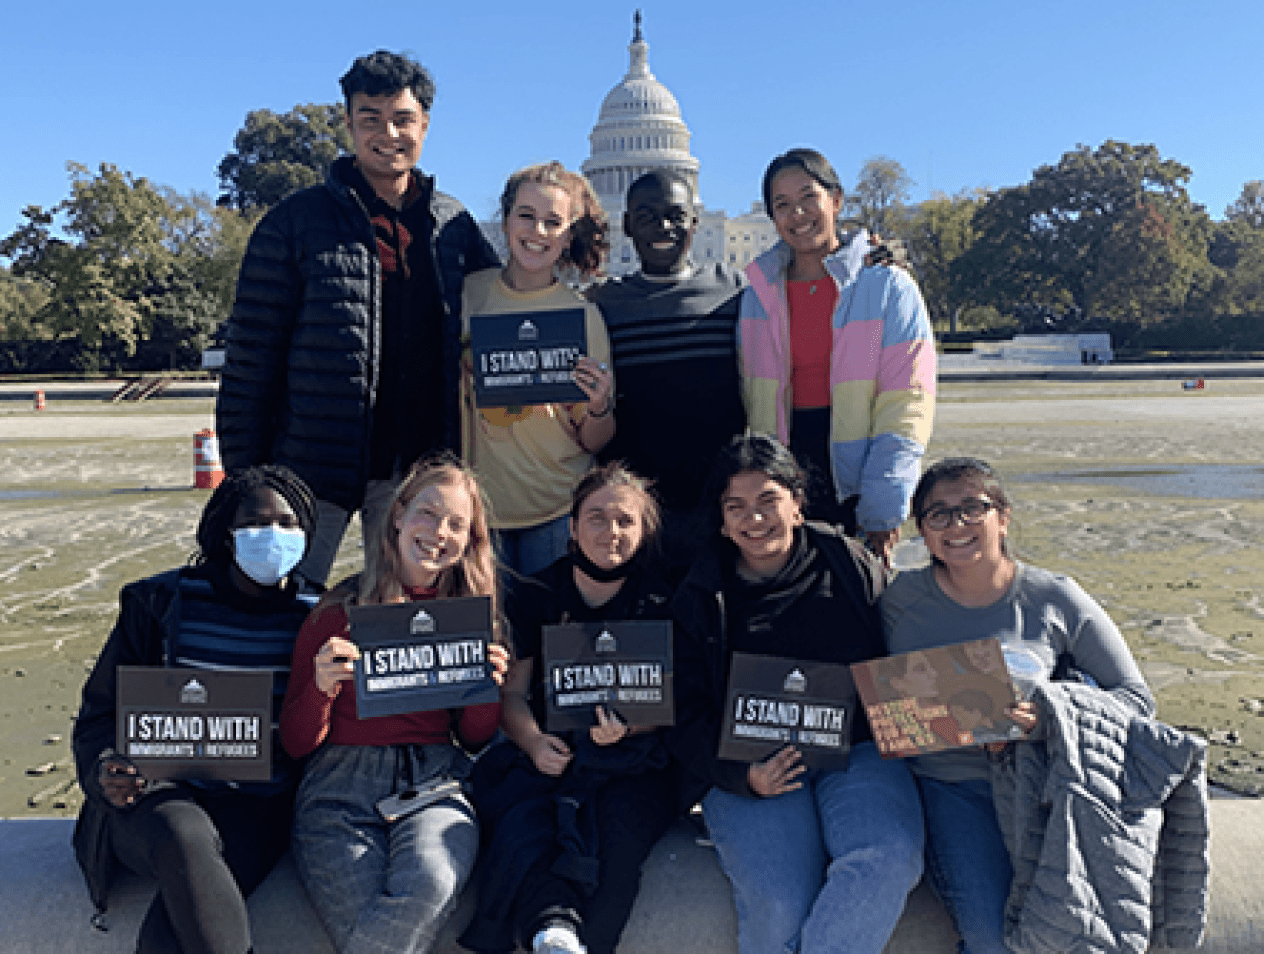 Students in Washington supporting refugees